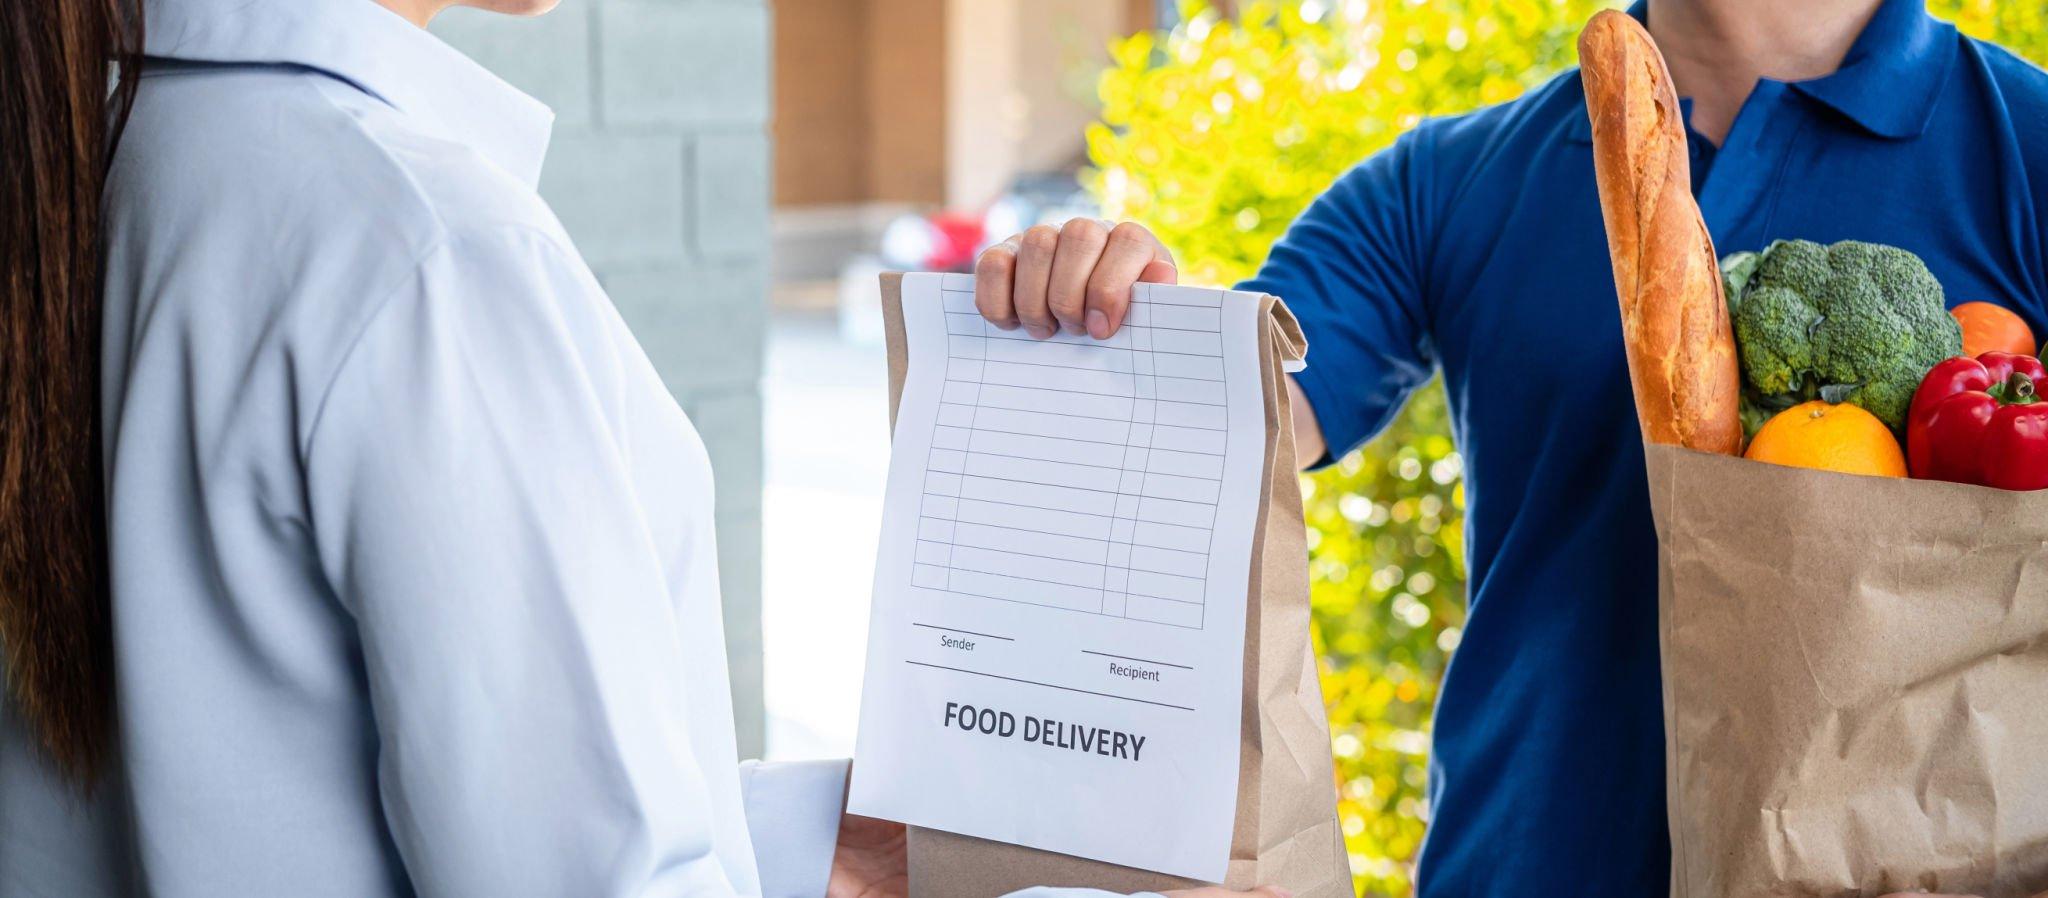 License Required for Food Delivery Business